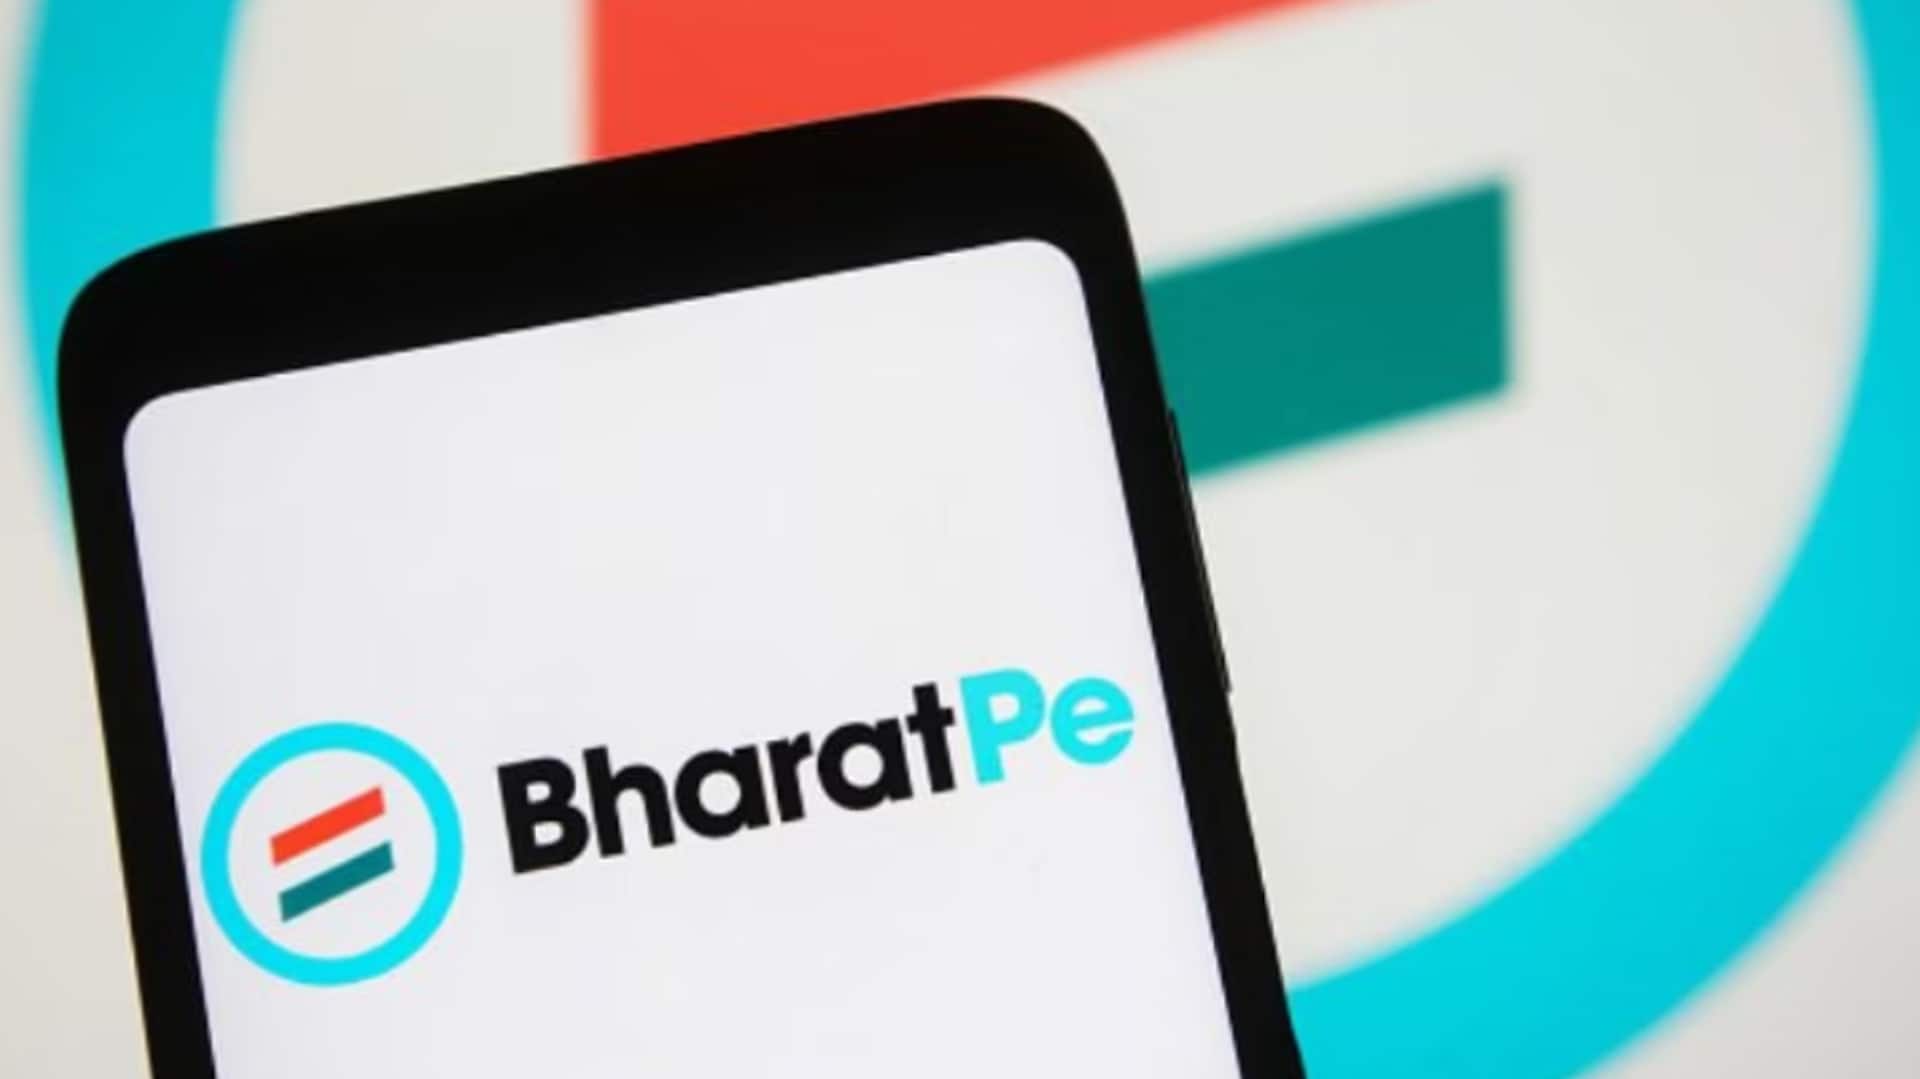 BharatPe turns EBITDA positive for the first time